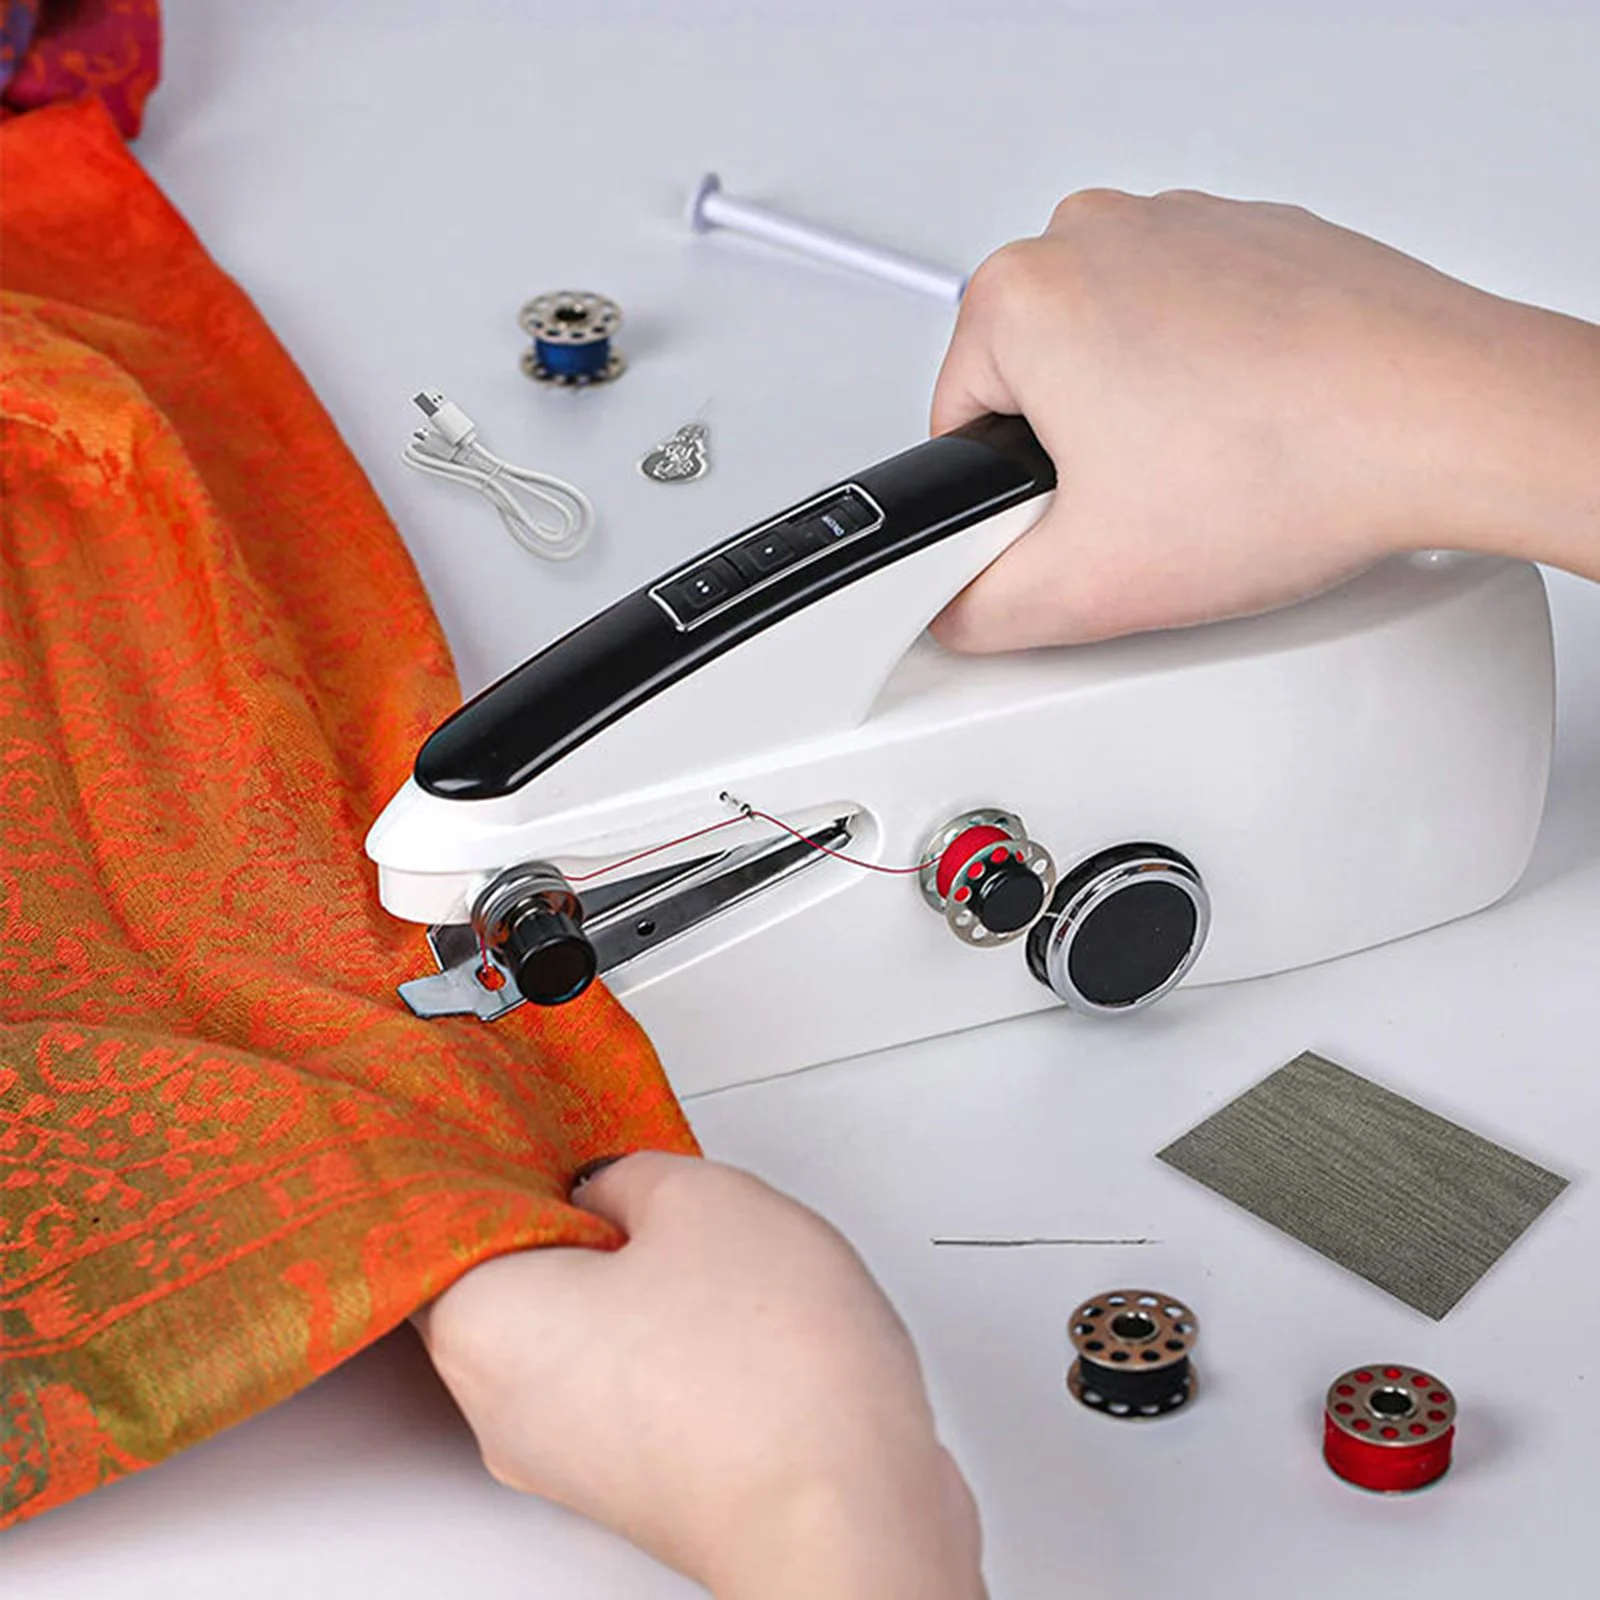 Mini Sewing Machine Handheld with Crafting Mending Machine 2 Speed Single Thread Stitching Electric Sewing Small Gadget